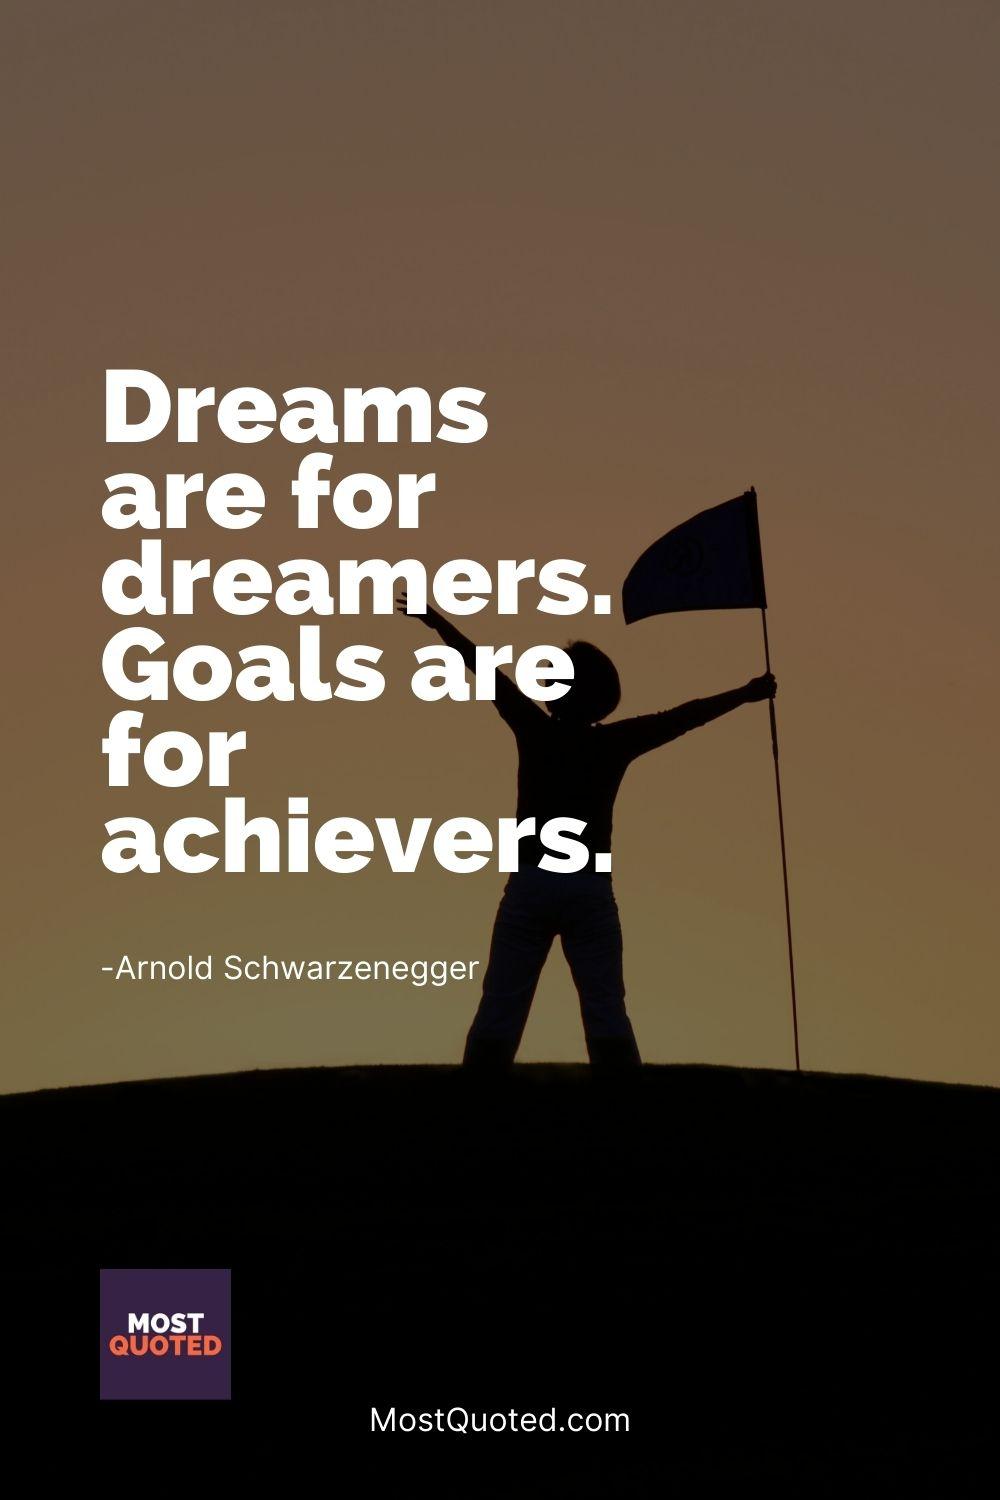 Dreams are for dreamers. Goals are for achievers. - Arnold Schwarzenegger